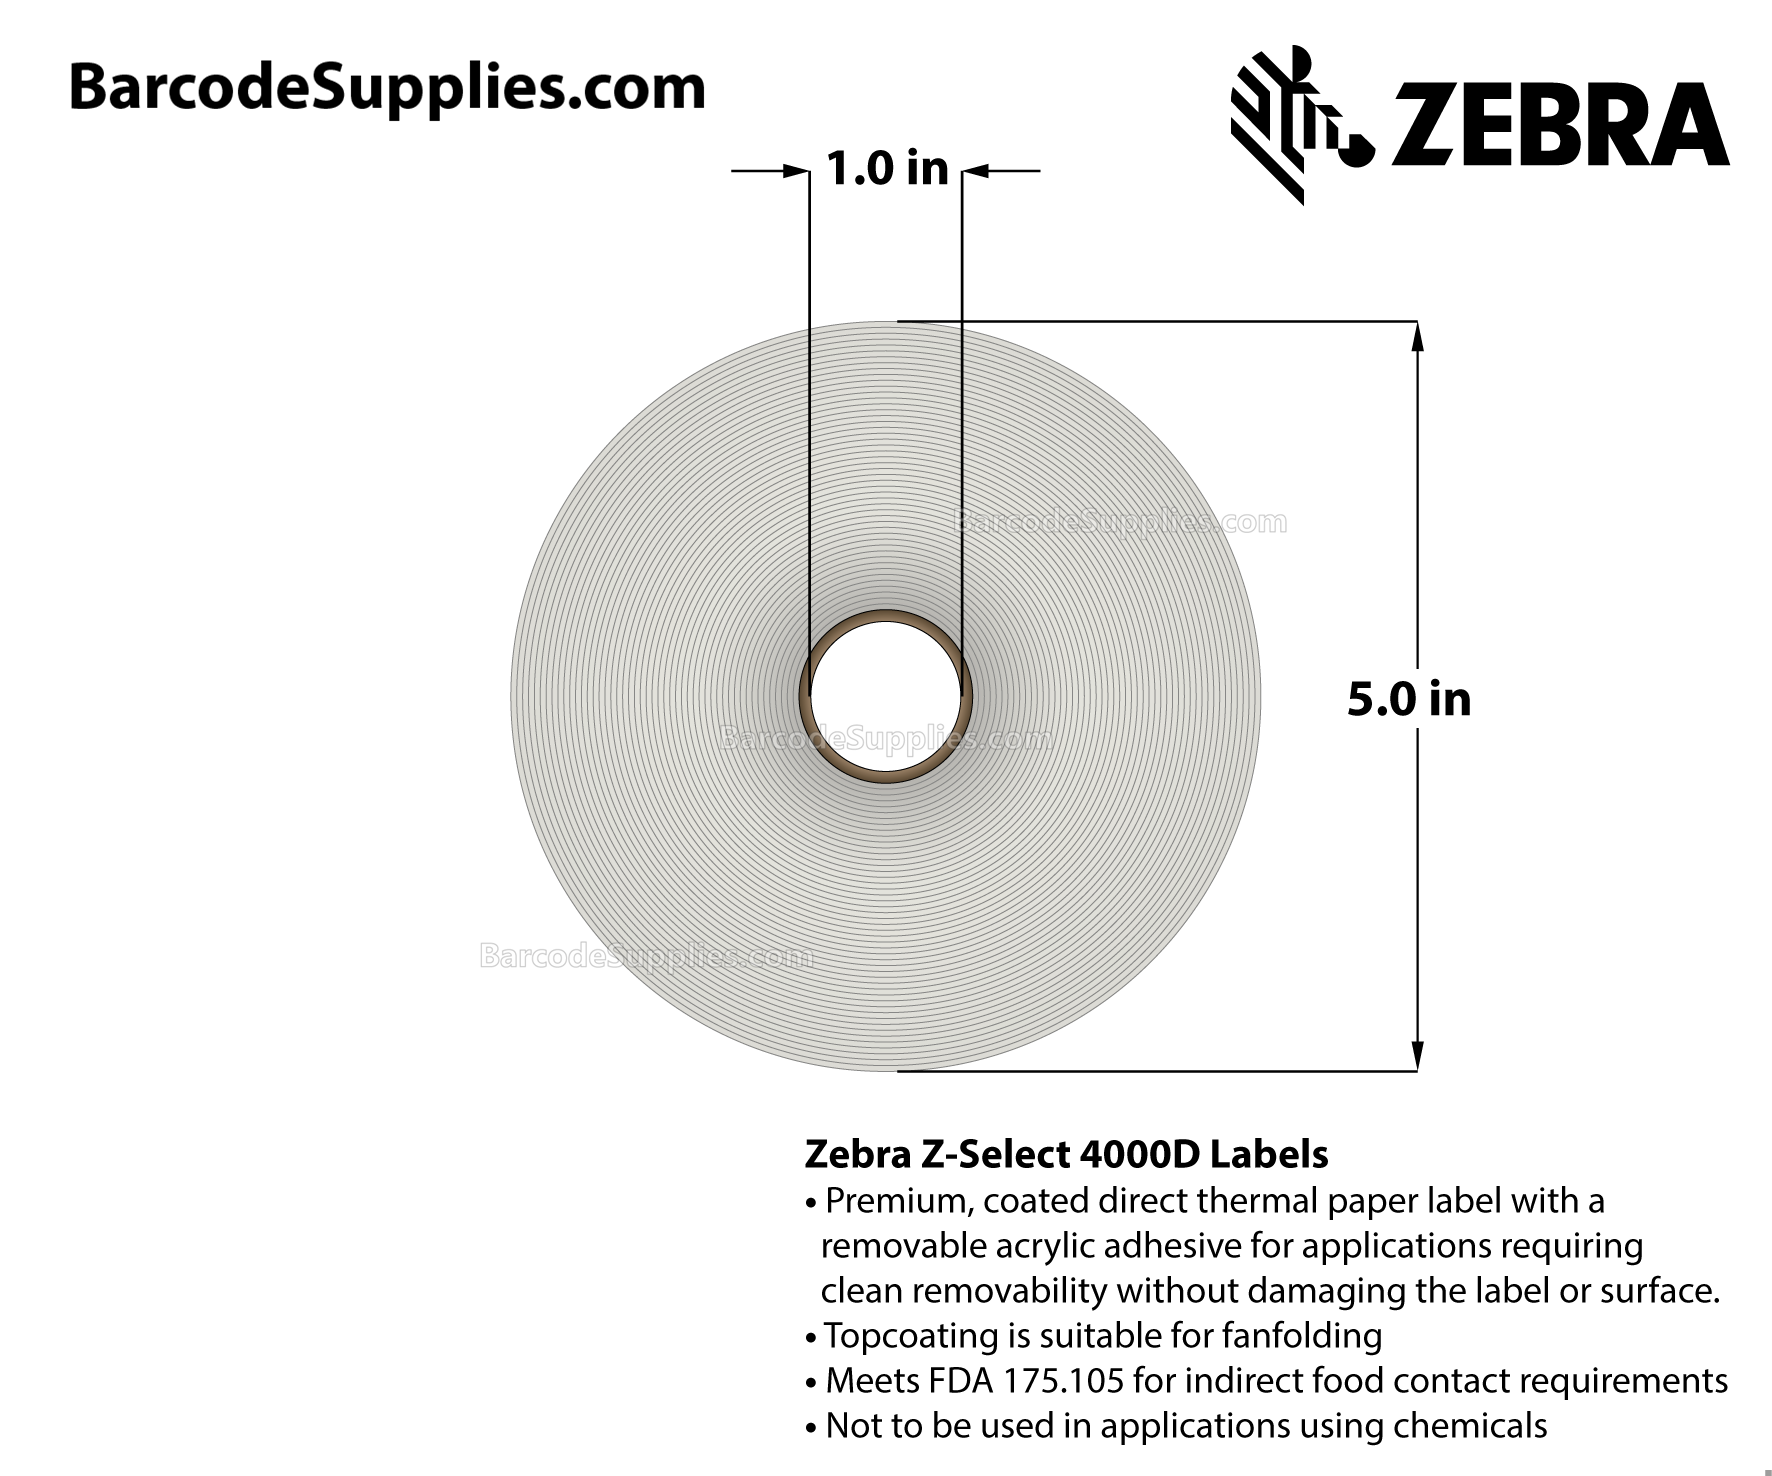 2.375 x 1 Direct Thermal White Z-Select 4000D Labels With All-Temp Adhesive - Center vertical slit creating two 1.1875" x 1" labels - Perforated - 2340 Labels Per Roll - Carton Of 6 Rolls - 14040 Labels Total - MPN: 10010050